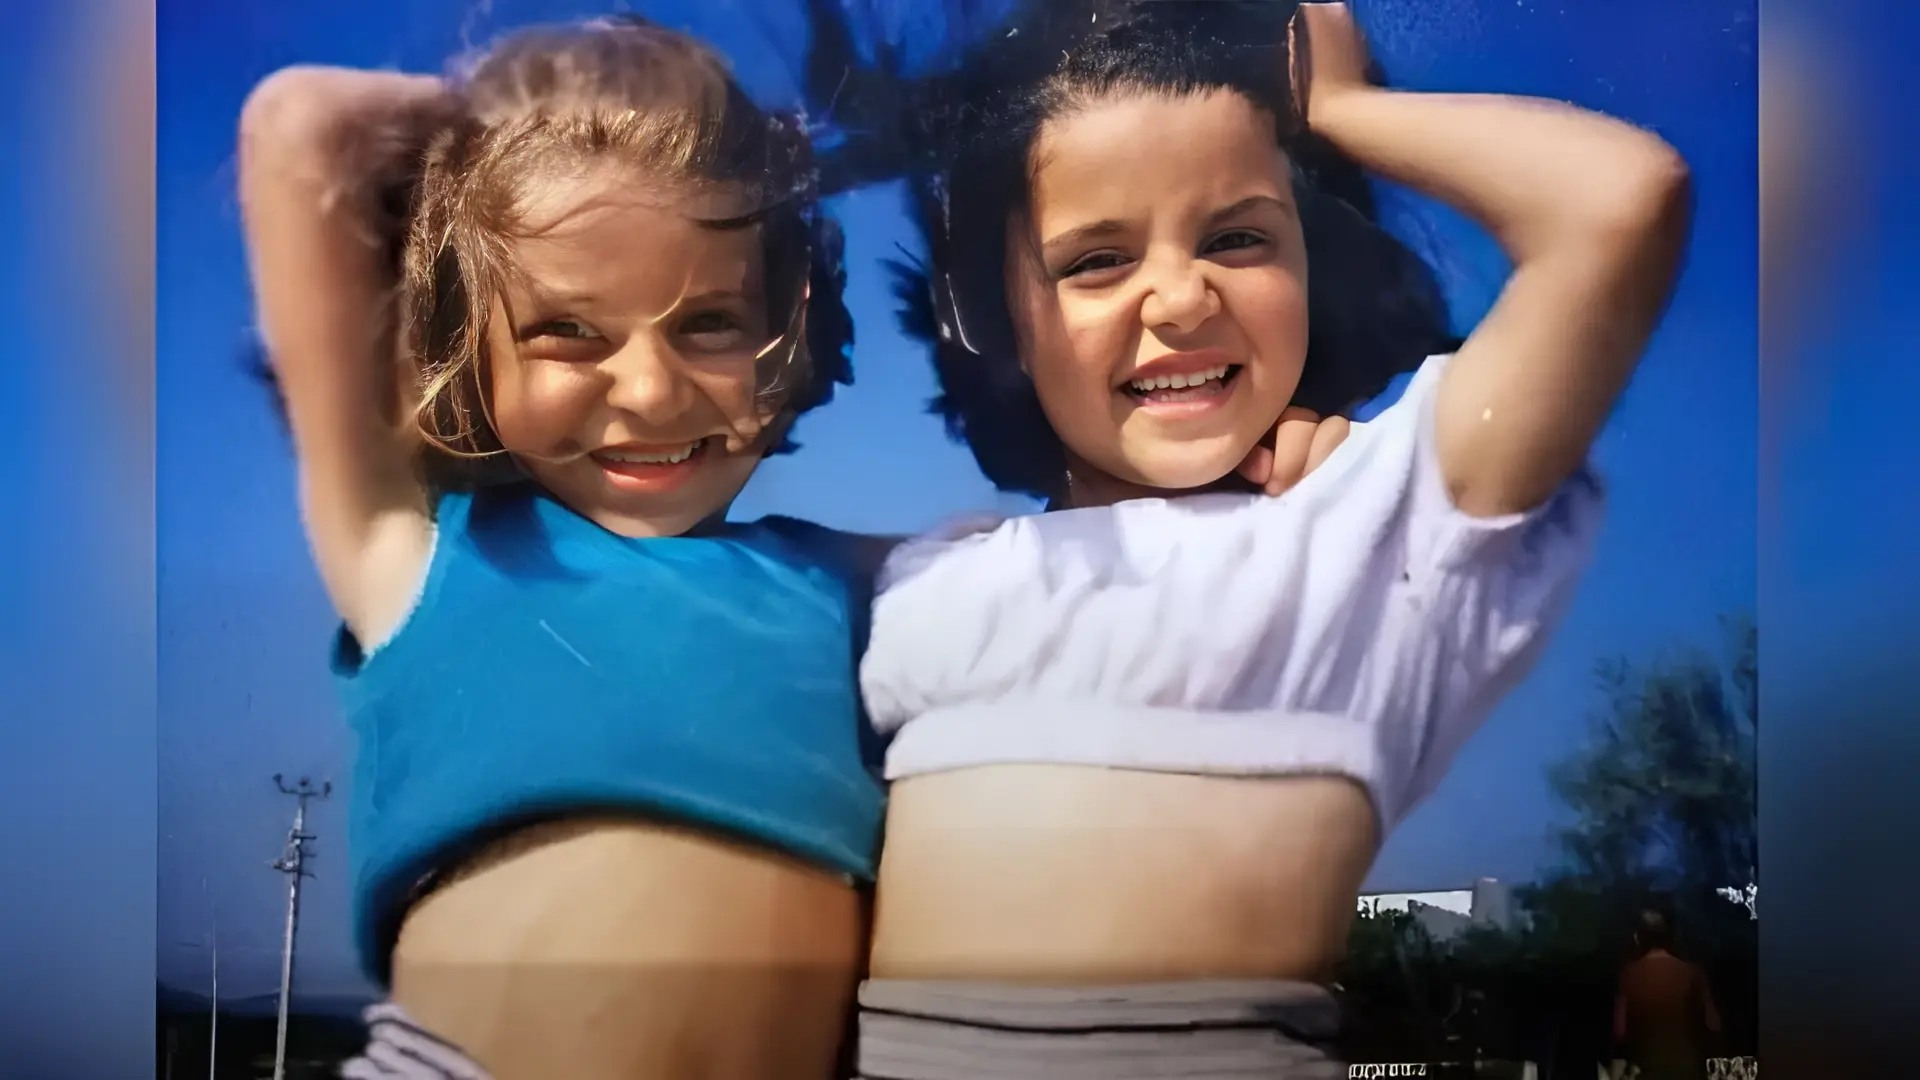 Hande Ercel with her sister as a child (right)